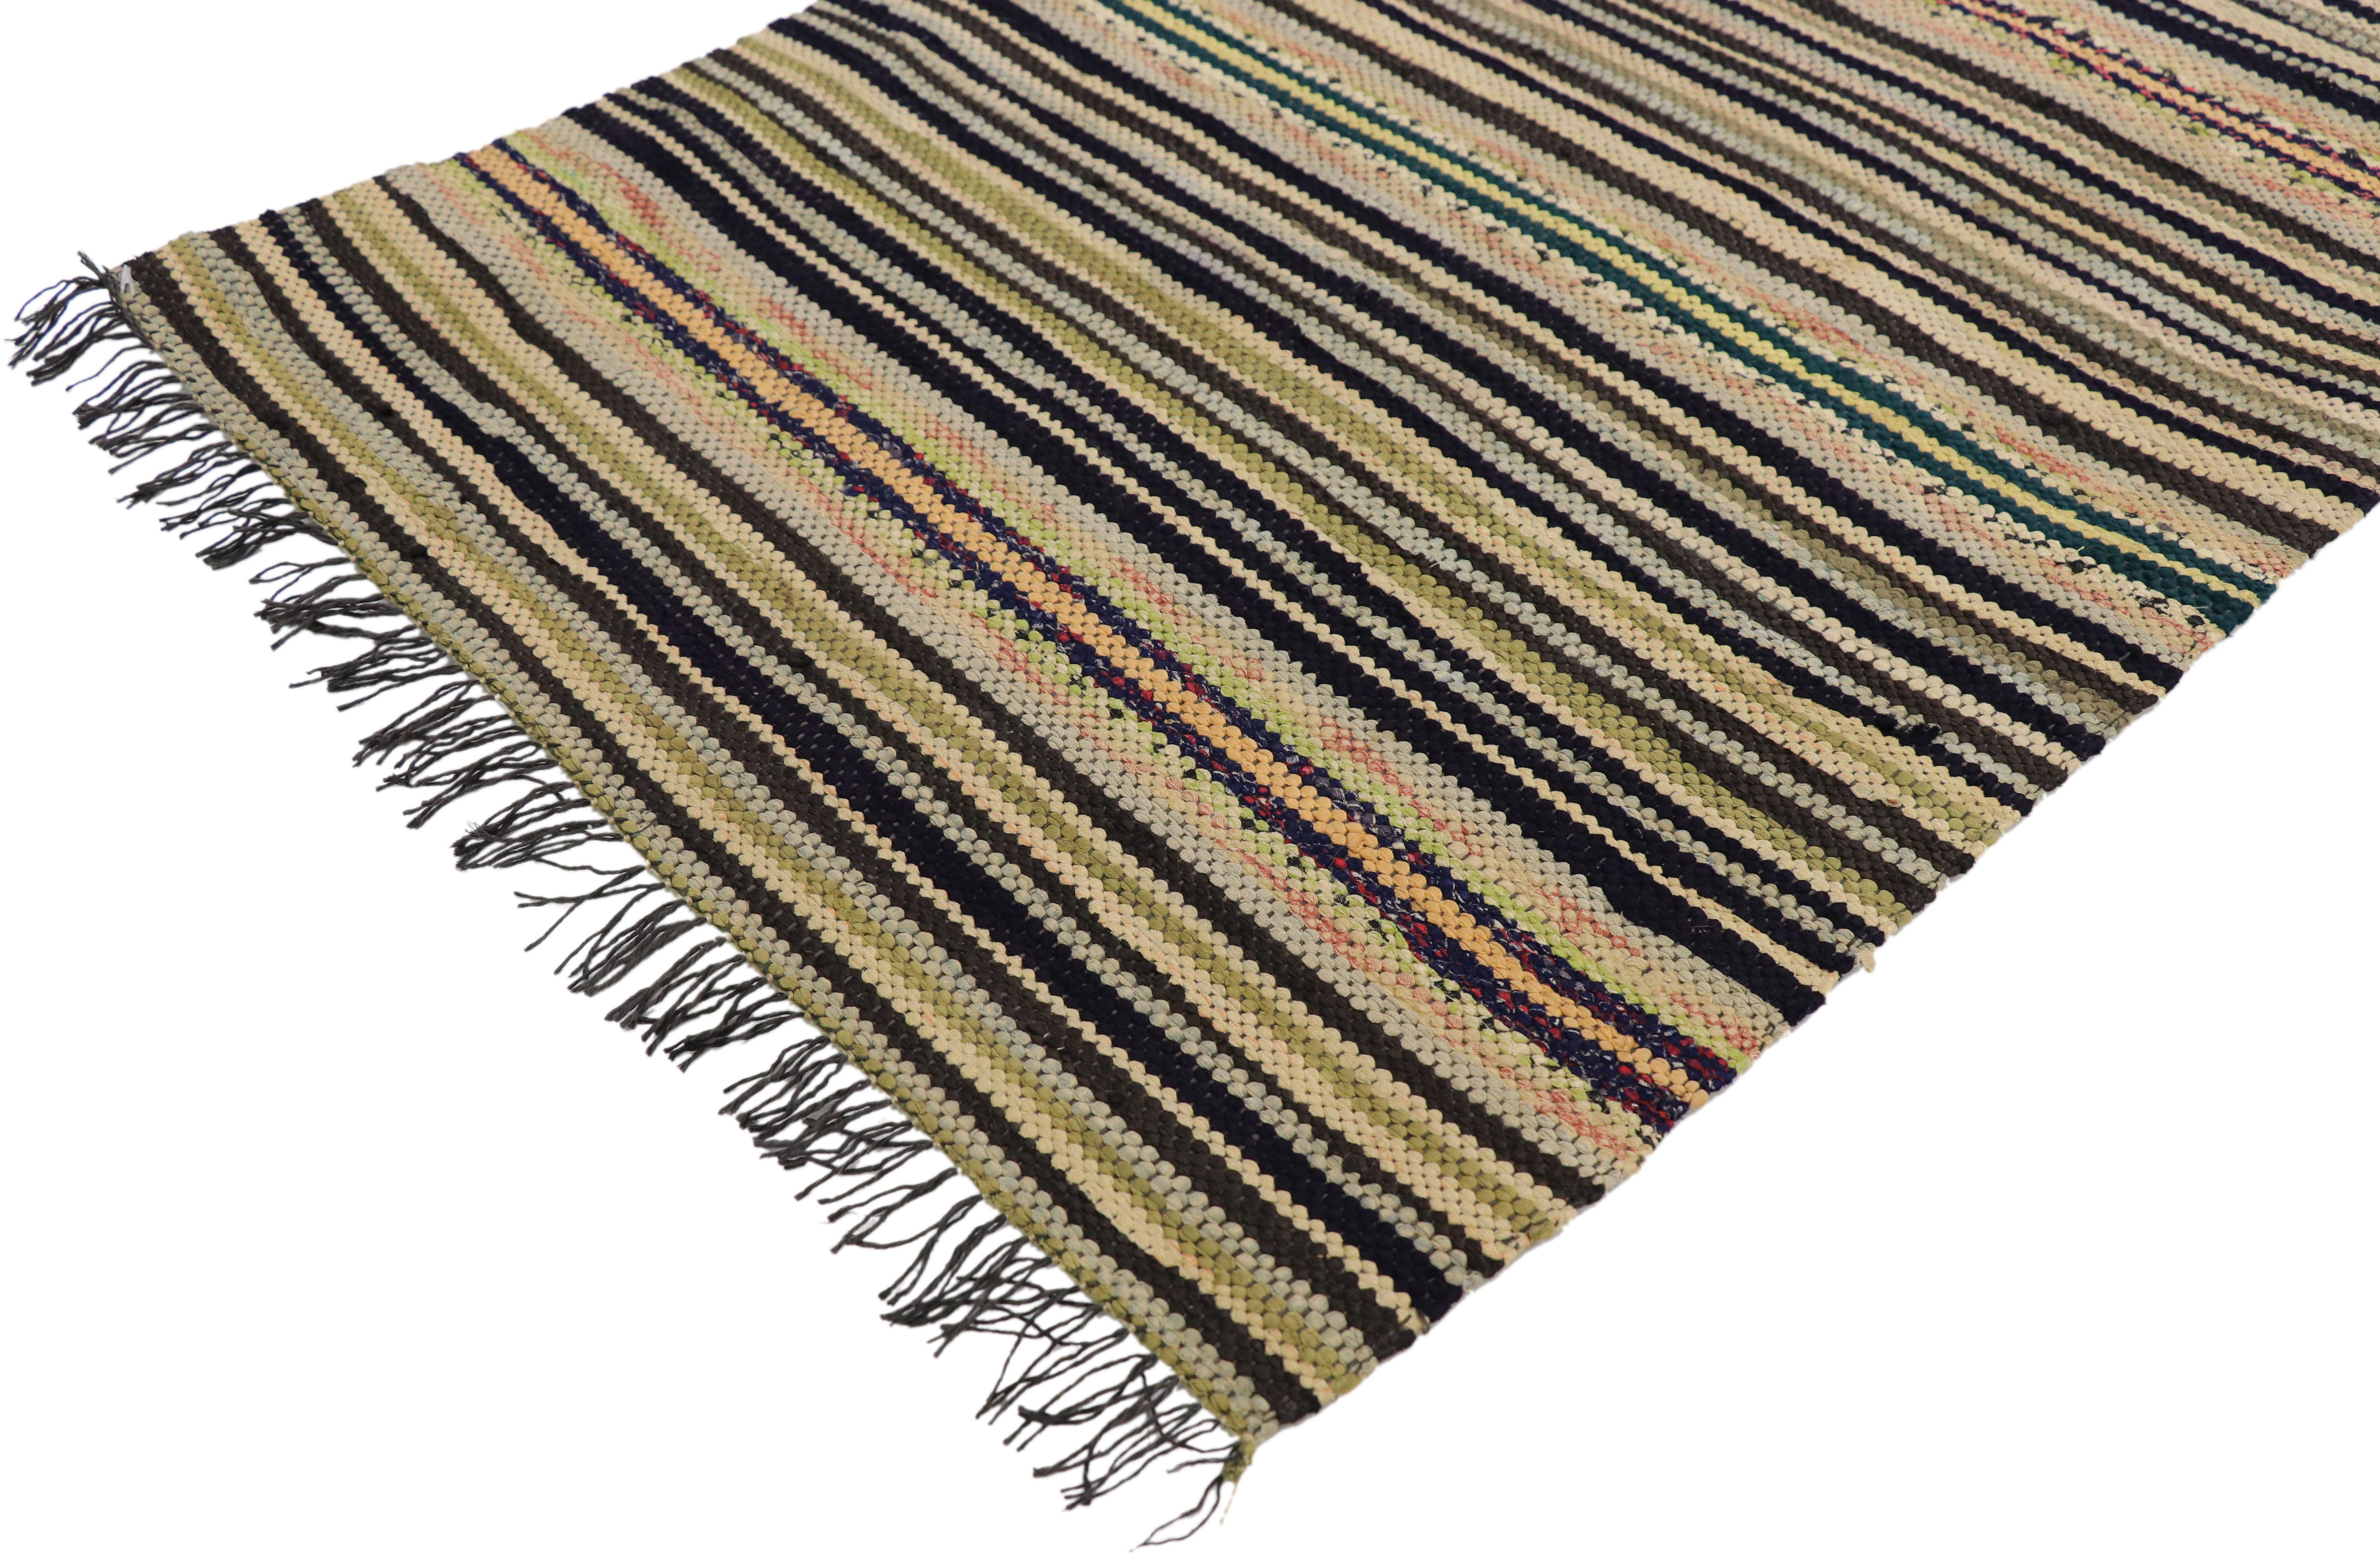 76624 Vintage American hooked runner with Country style, narrow striped hallway runner. This vintage American Hooked runner features a variety of colorful stripes composed of both wide and narrow bands forming a captivating visual effect. Vintage,